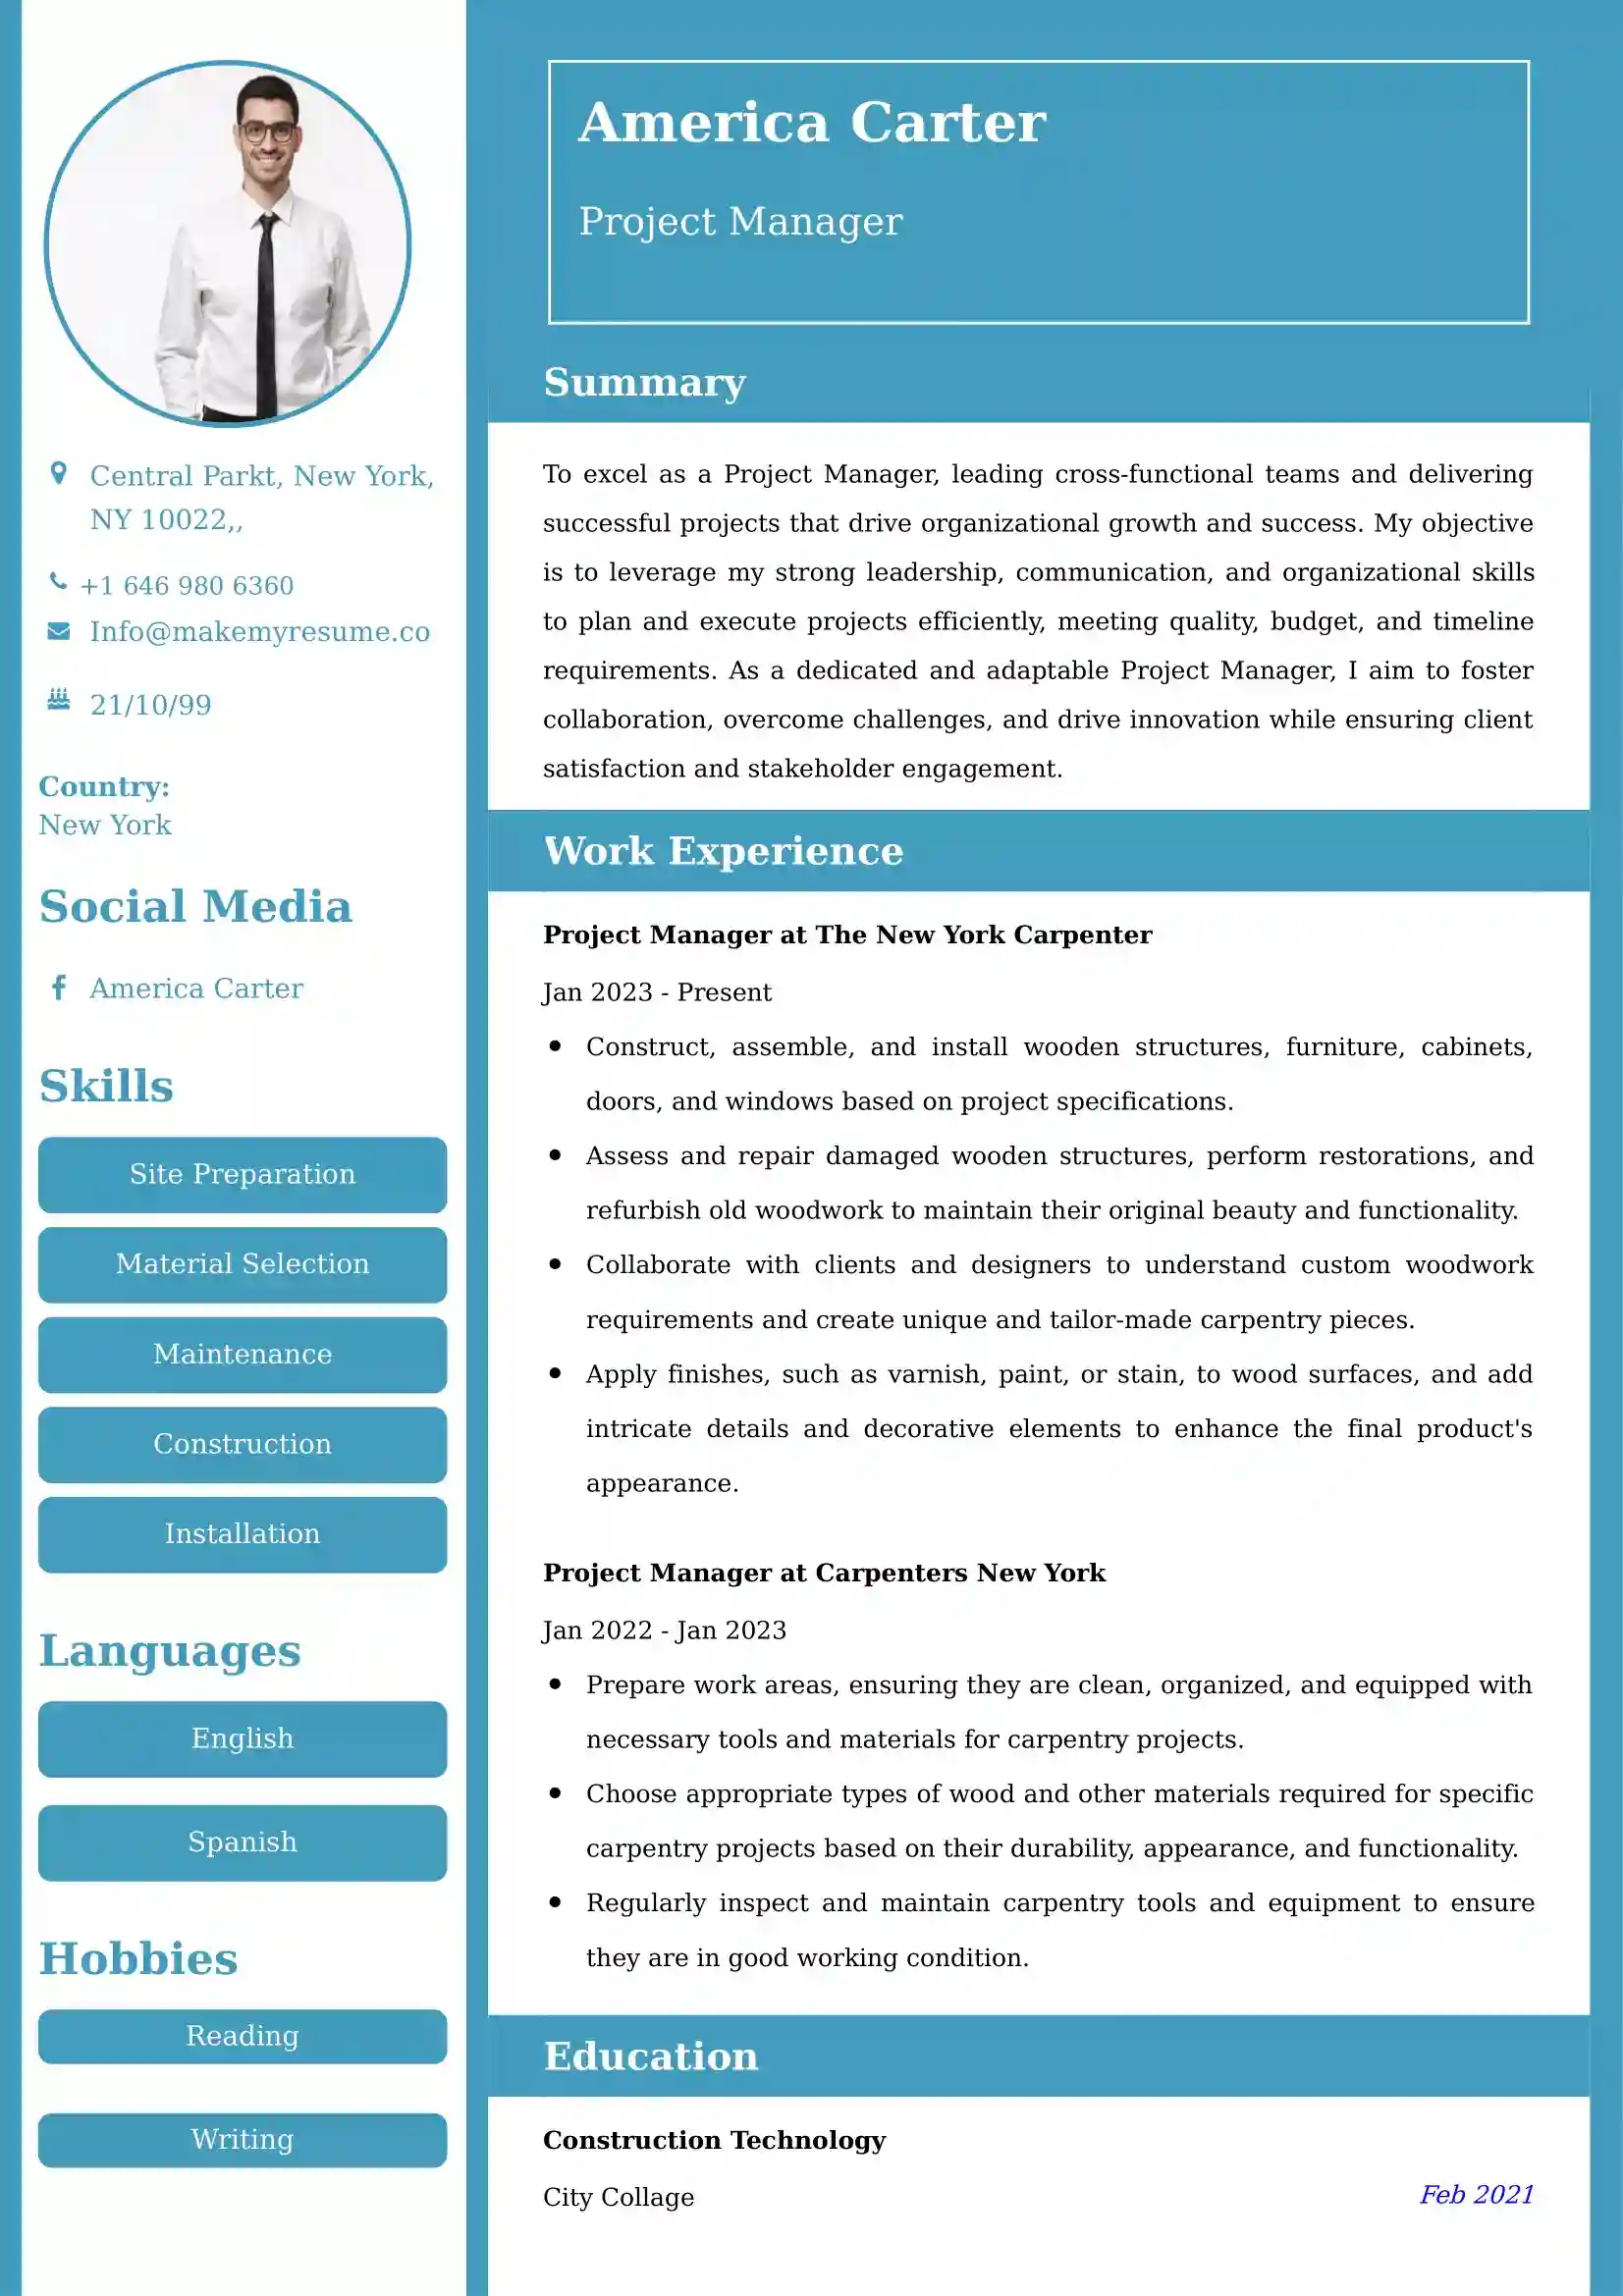 Project Manager Resume Examples - UK Format, Latest Template.